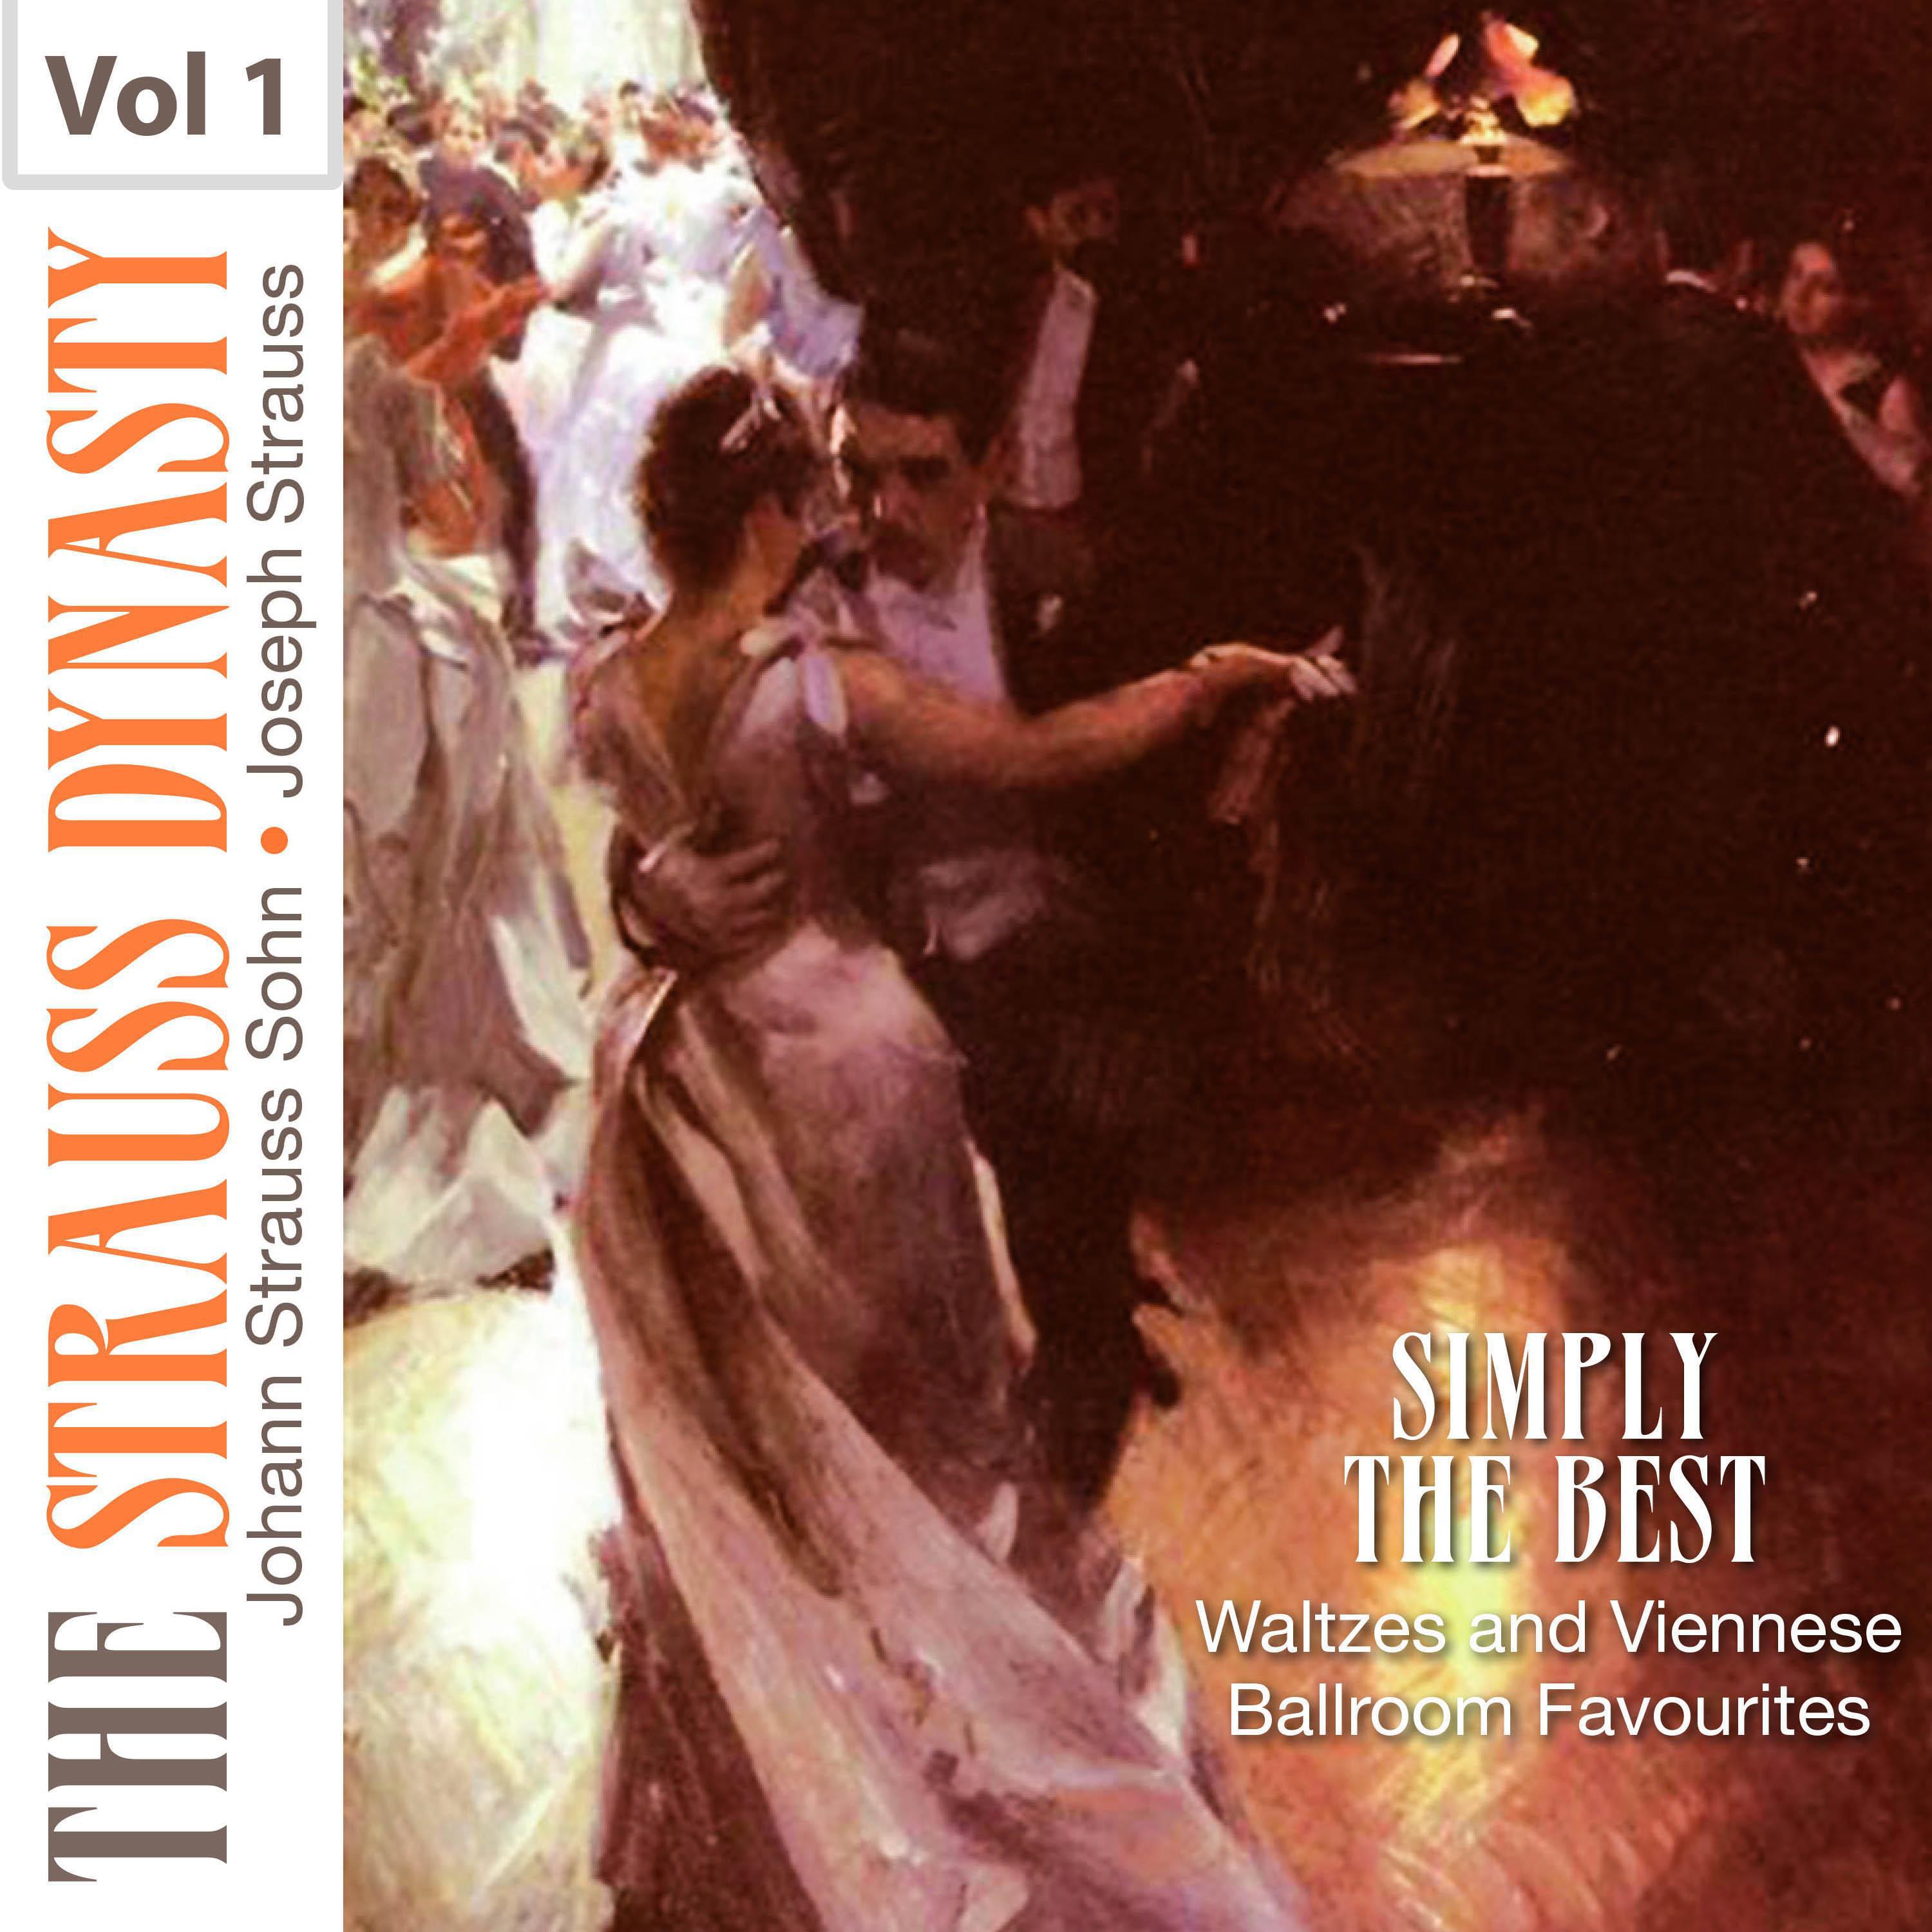 Simply the Best Waltzes and Viennese Ballroom Favourites, Vol. 1